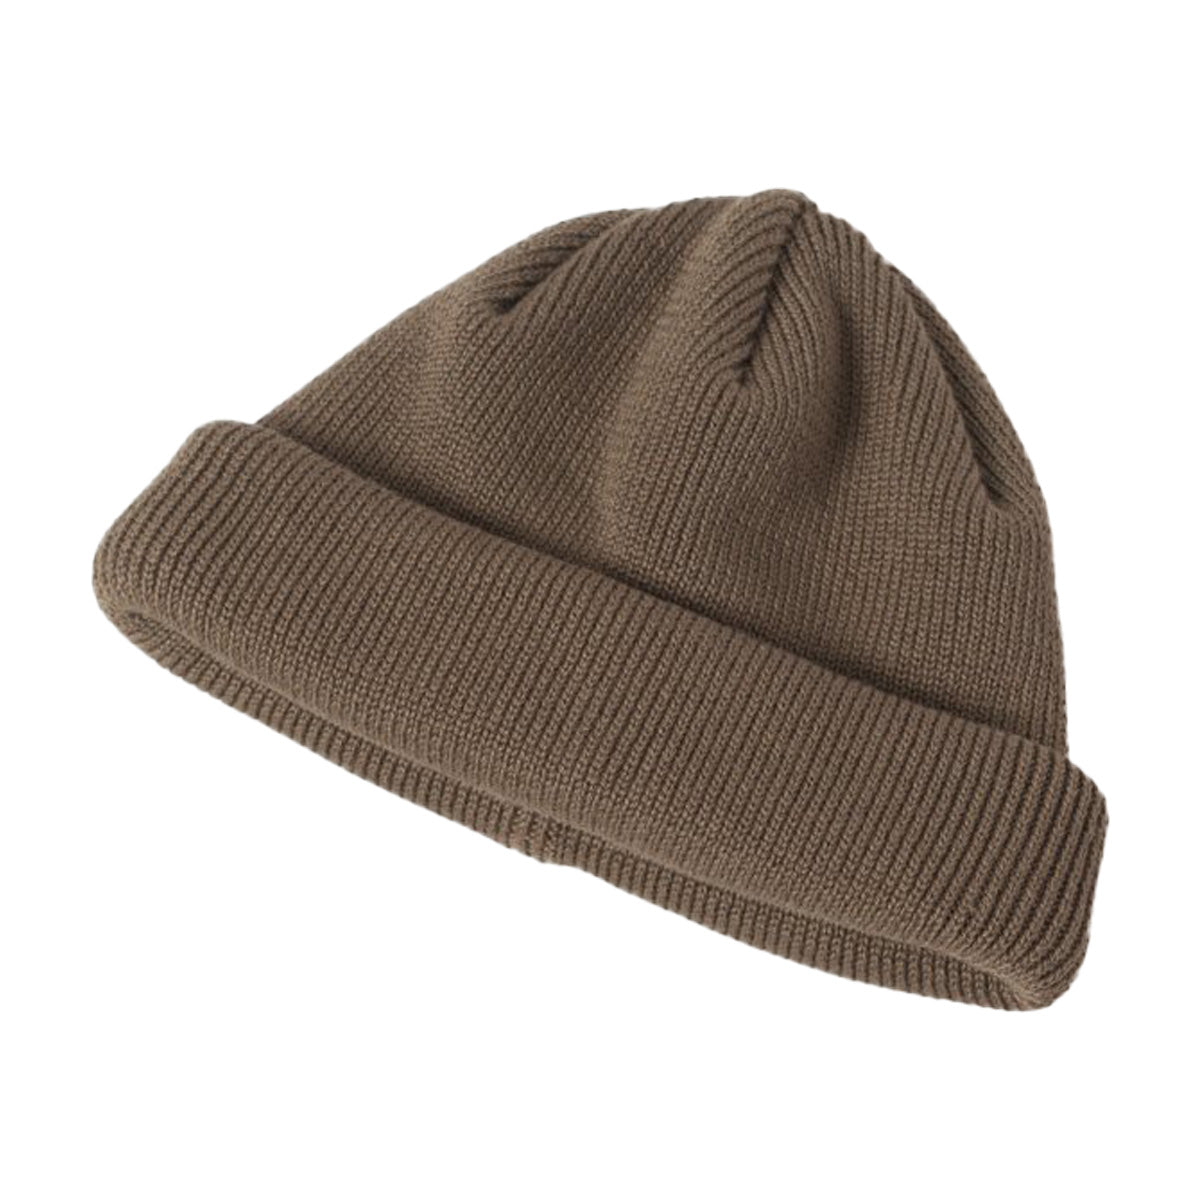 Racal Roll Knit Cap, Olive